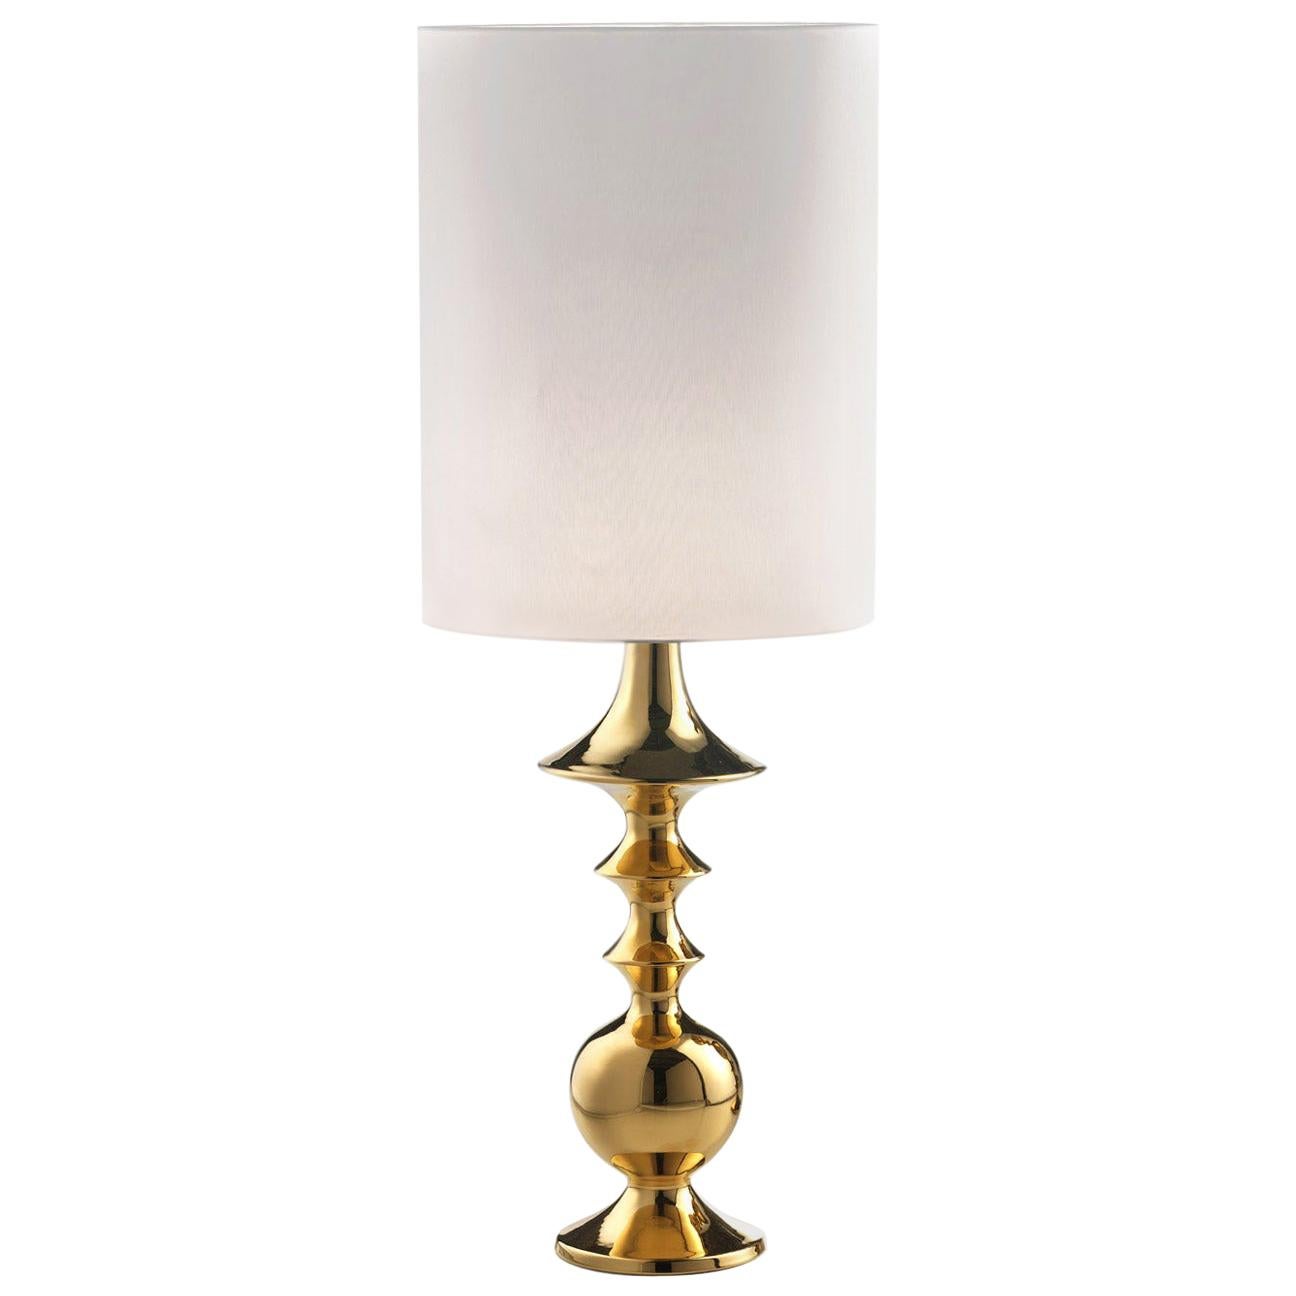 Ceramic Table Lamp "BRIX" Handcrafted in 24-Karat Gold by Gabriella B. in Italy For Sale